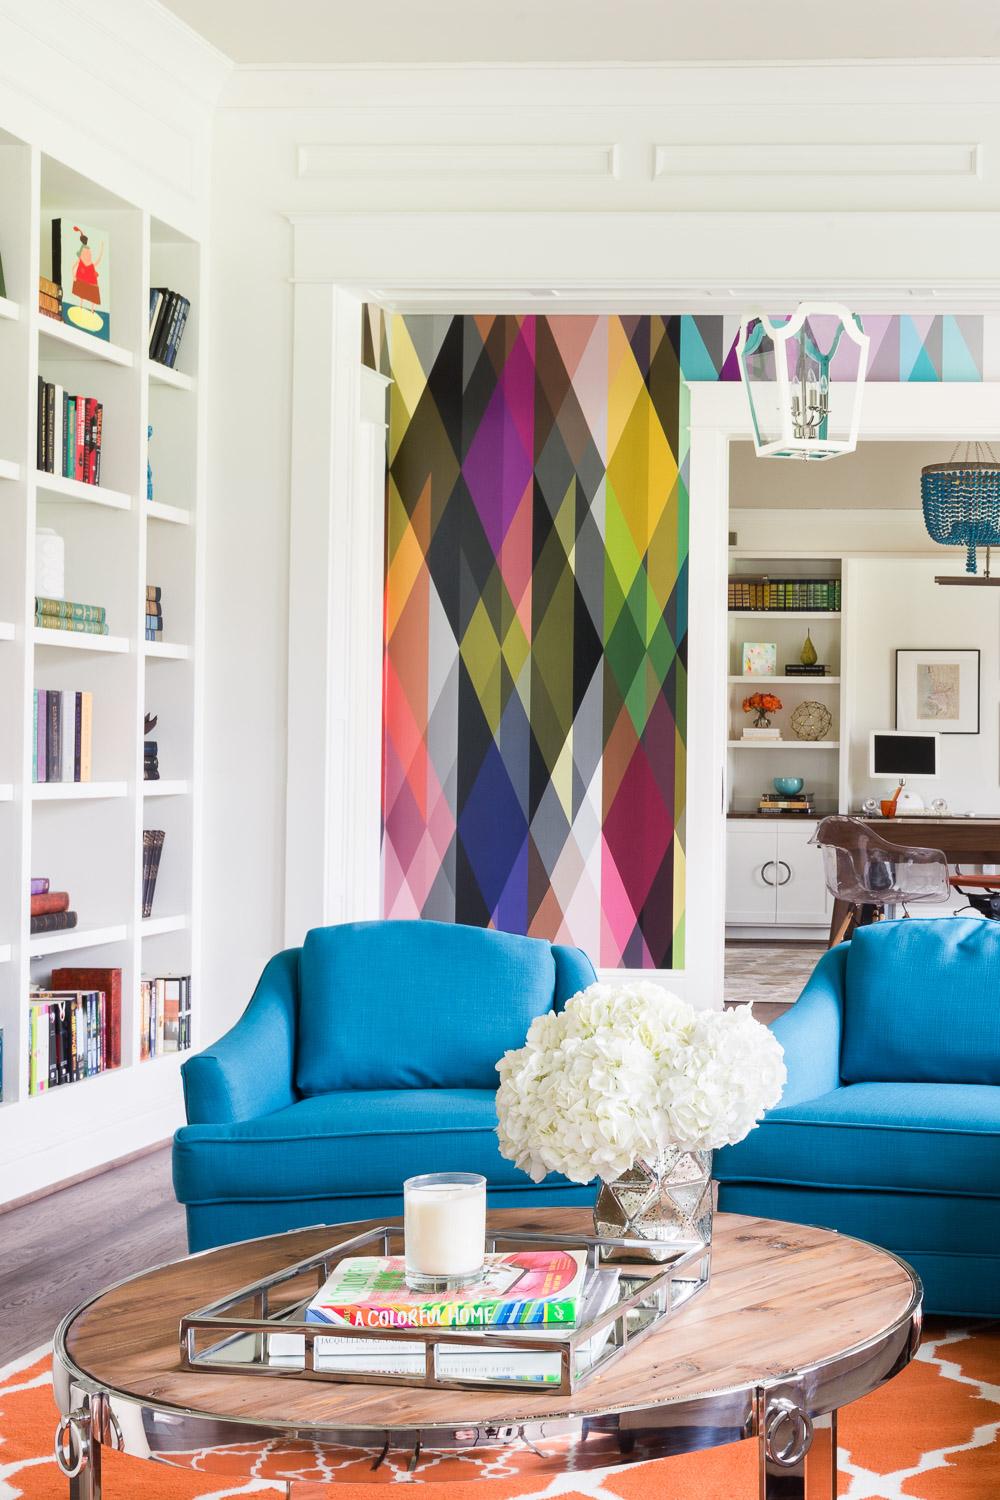 10 Bright Tips for Adding Color to Your Home